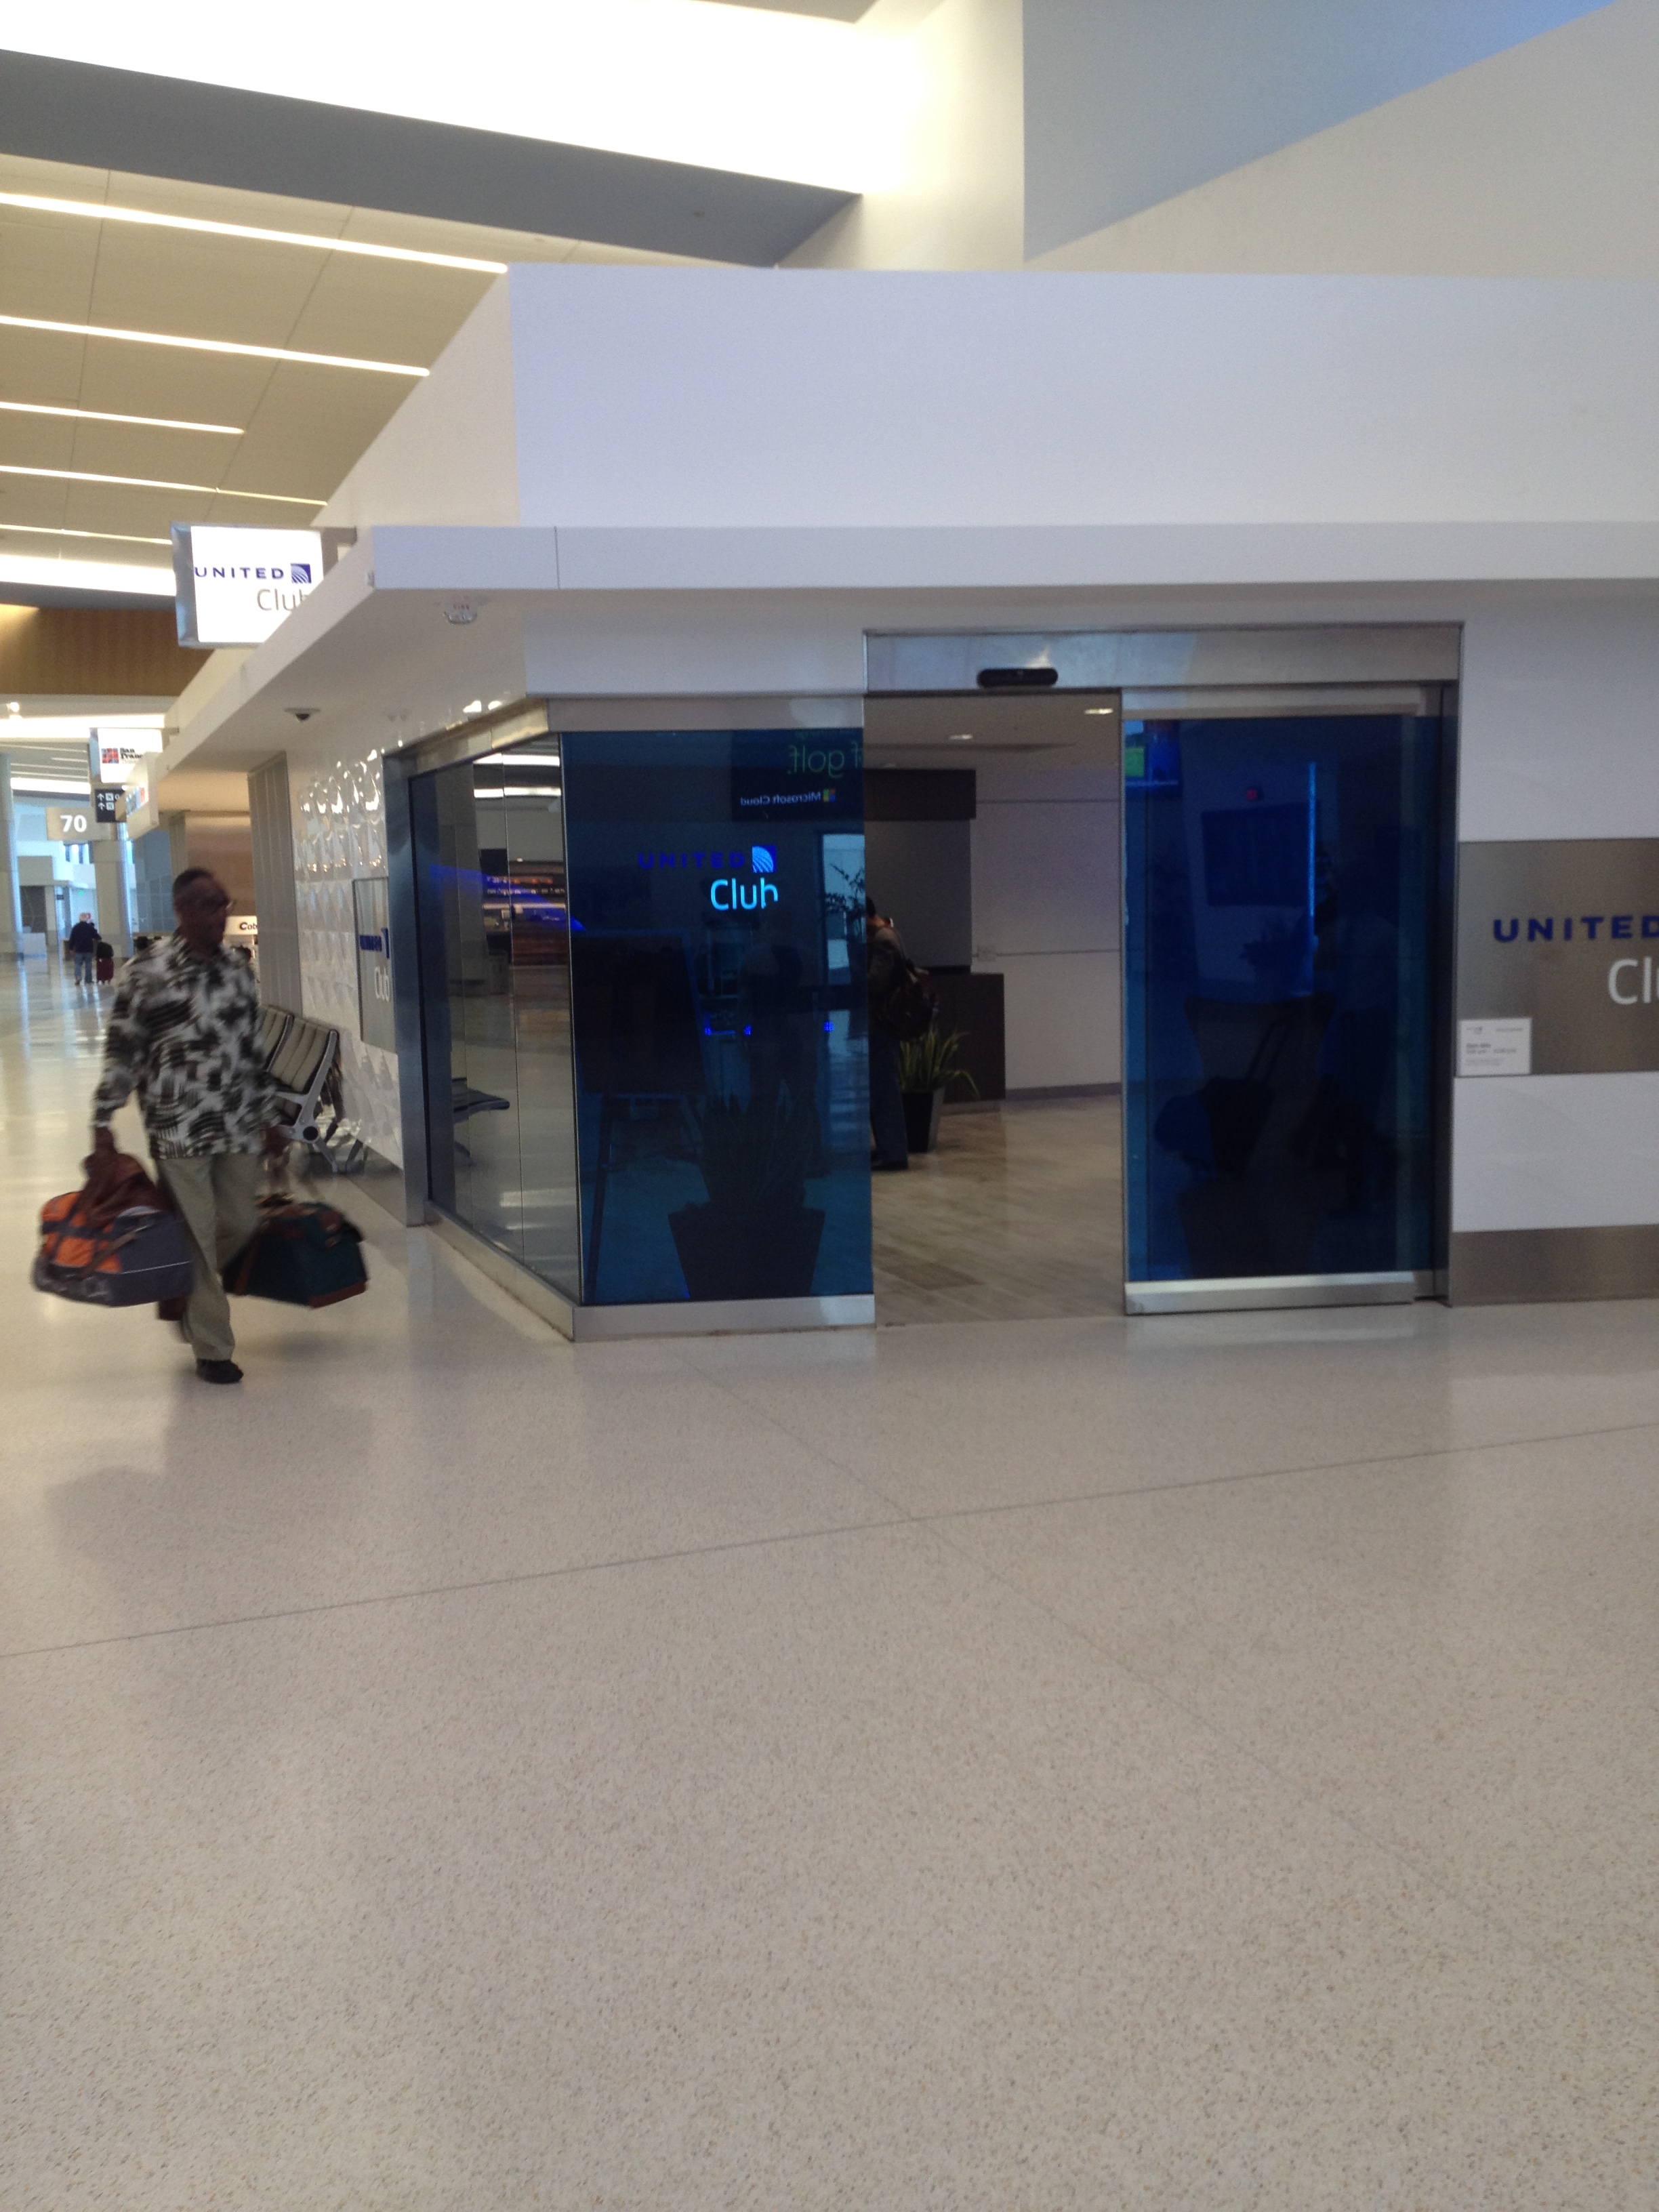 Review of United's Temporary SFO Club - The Military Frequent Flyer